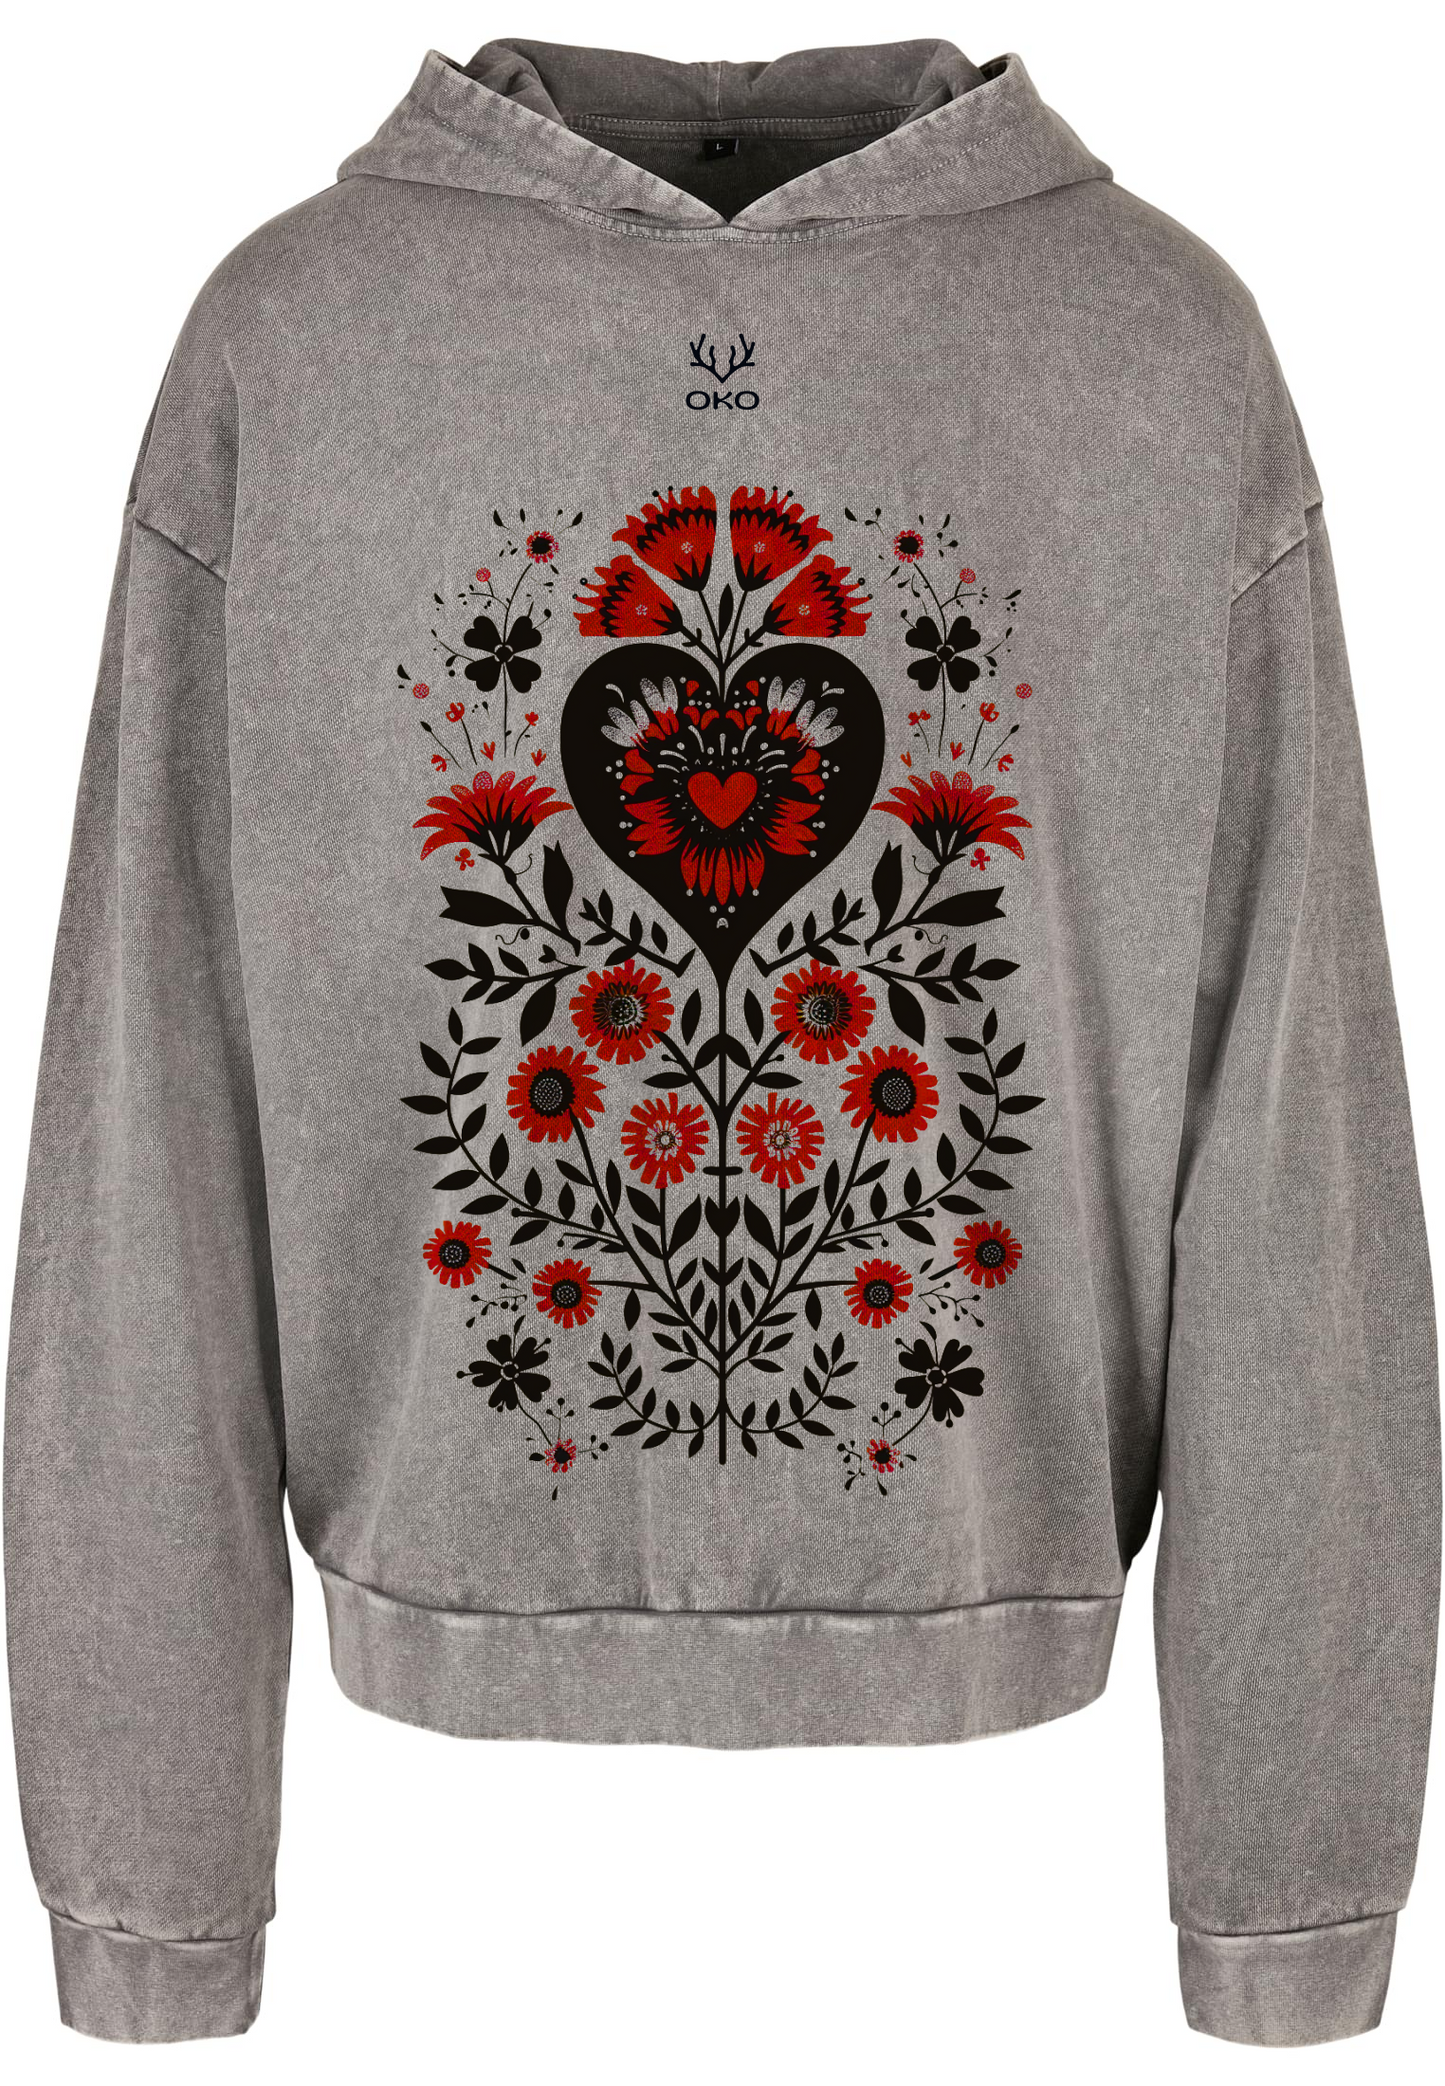 Grey unisex hoodie with ornament print